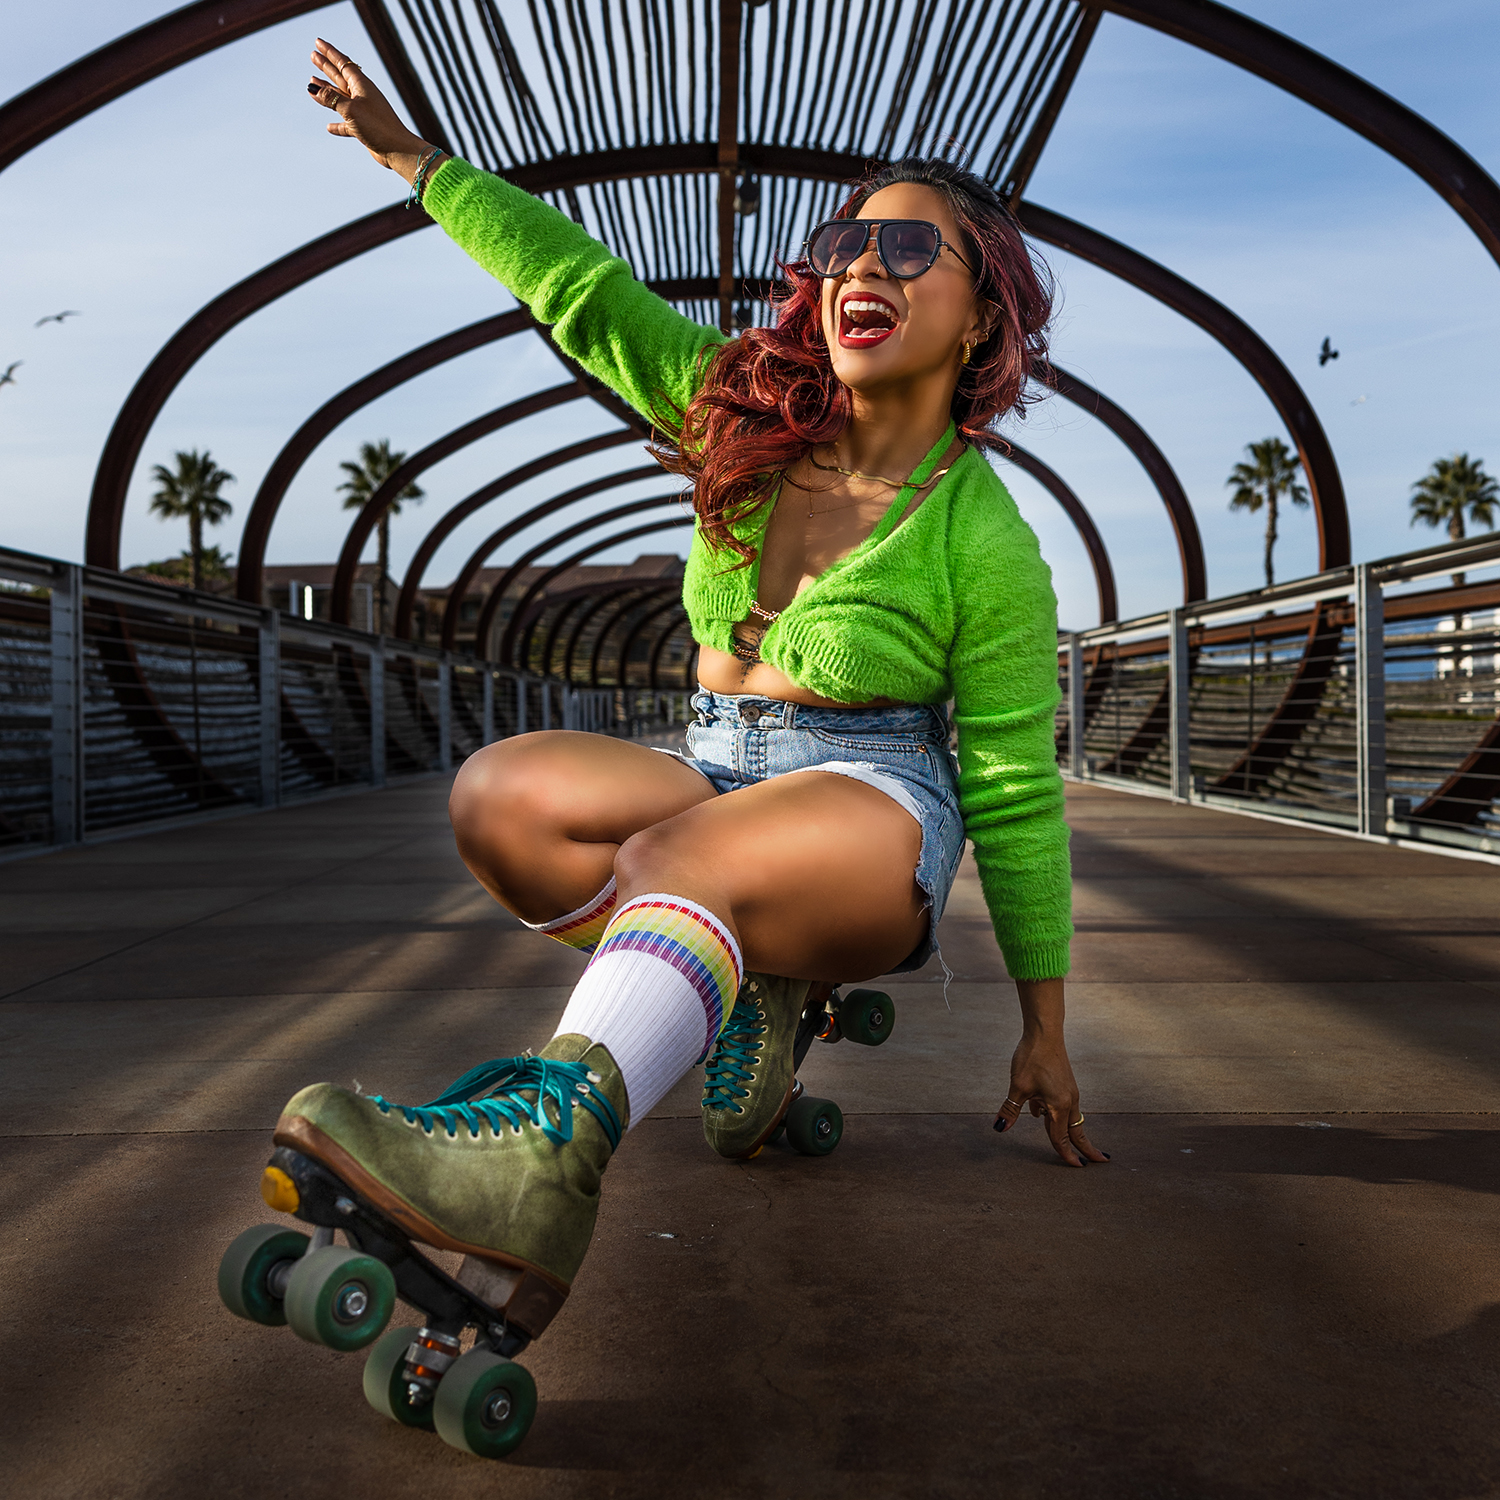 Phillapena woman wearing a green outfit with green rollerskates poses squatted down with left leg extended and right arm reaching up.